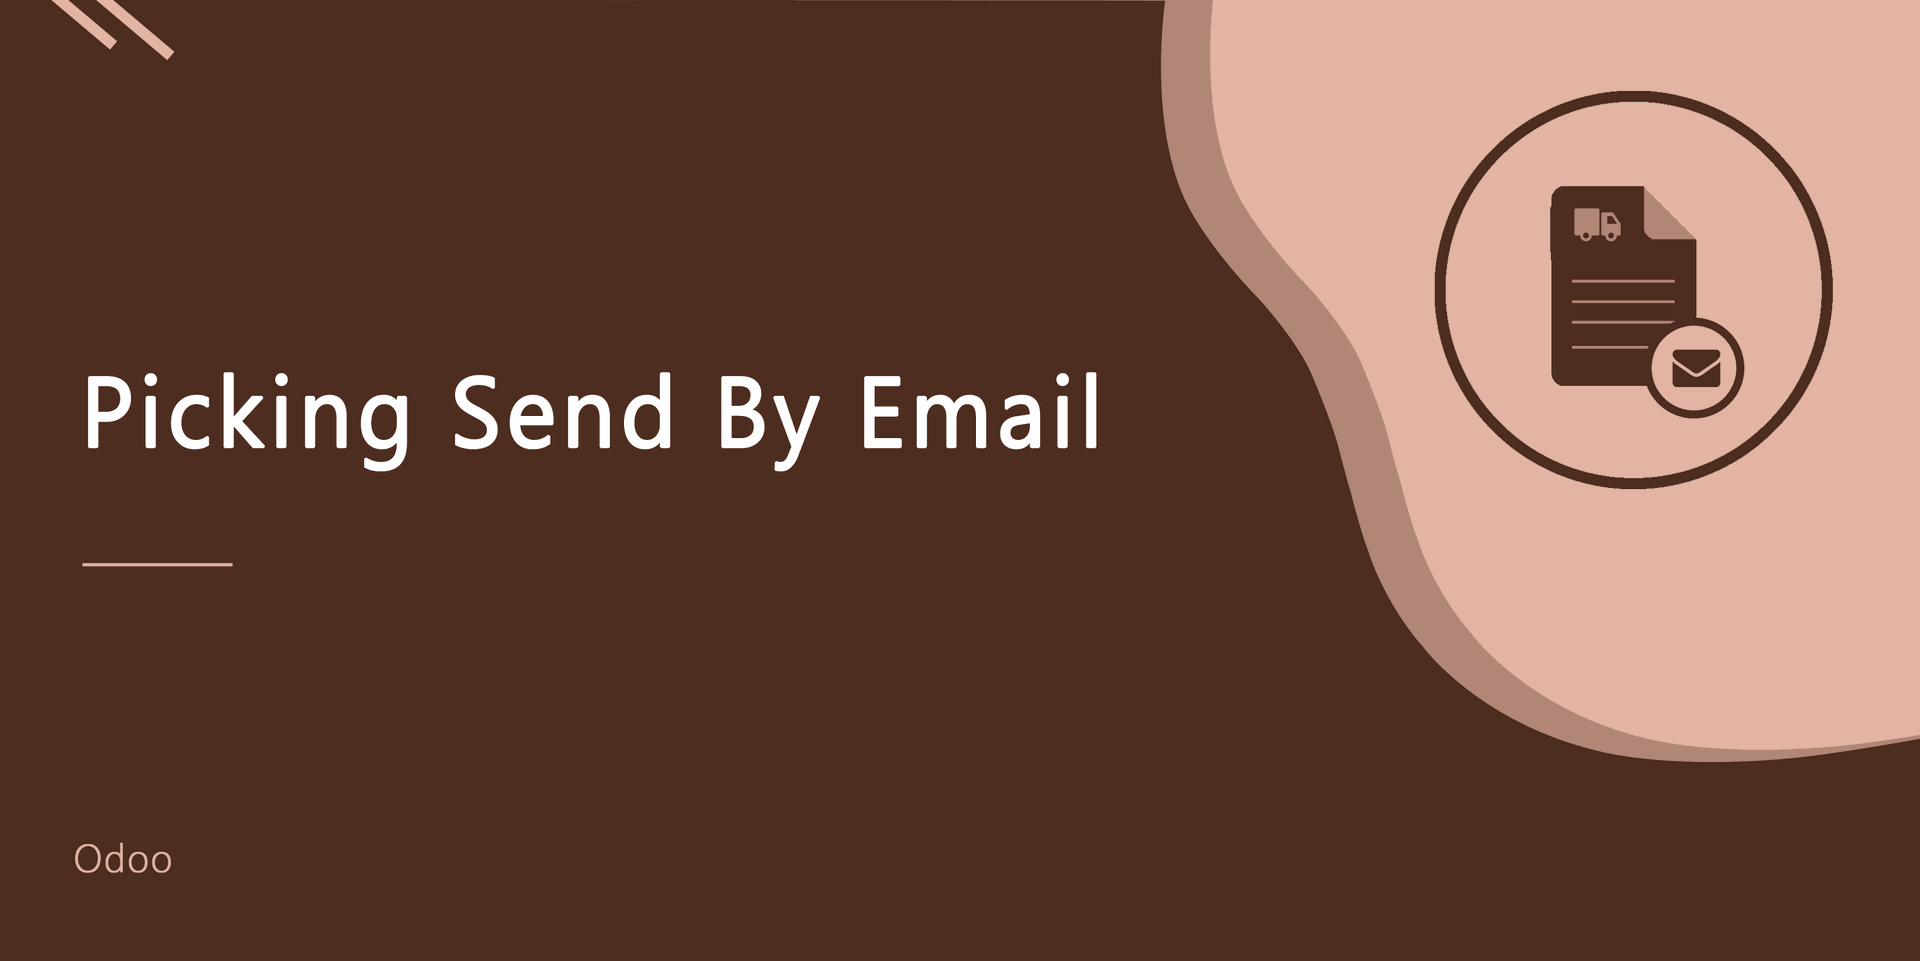 Picking Send By Email
